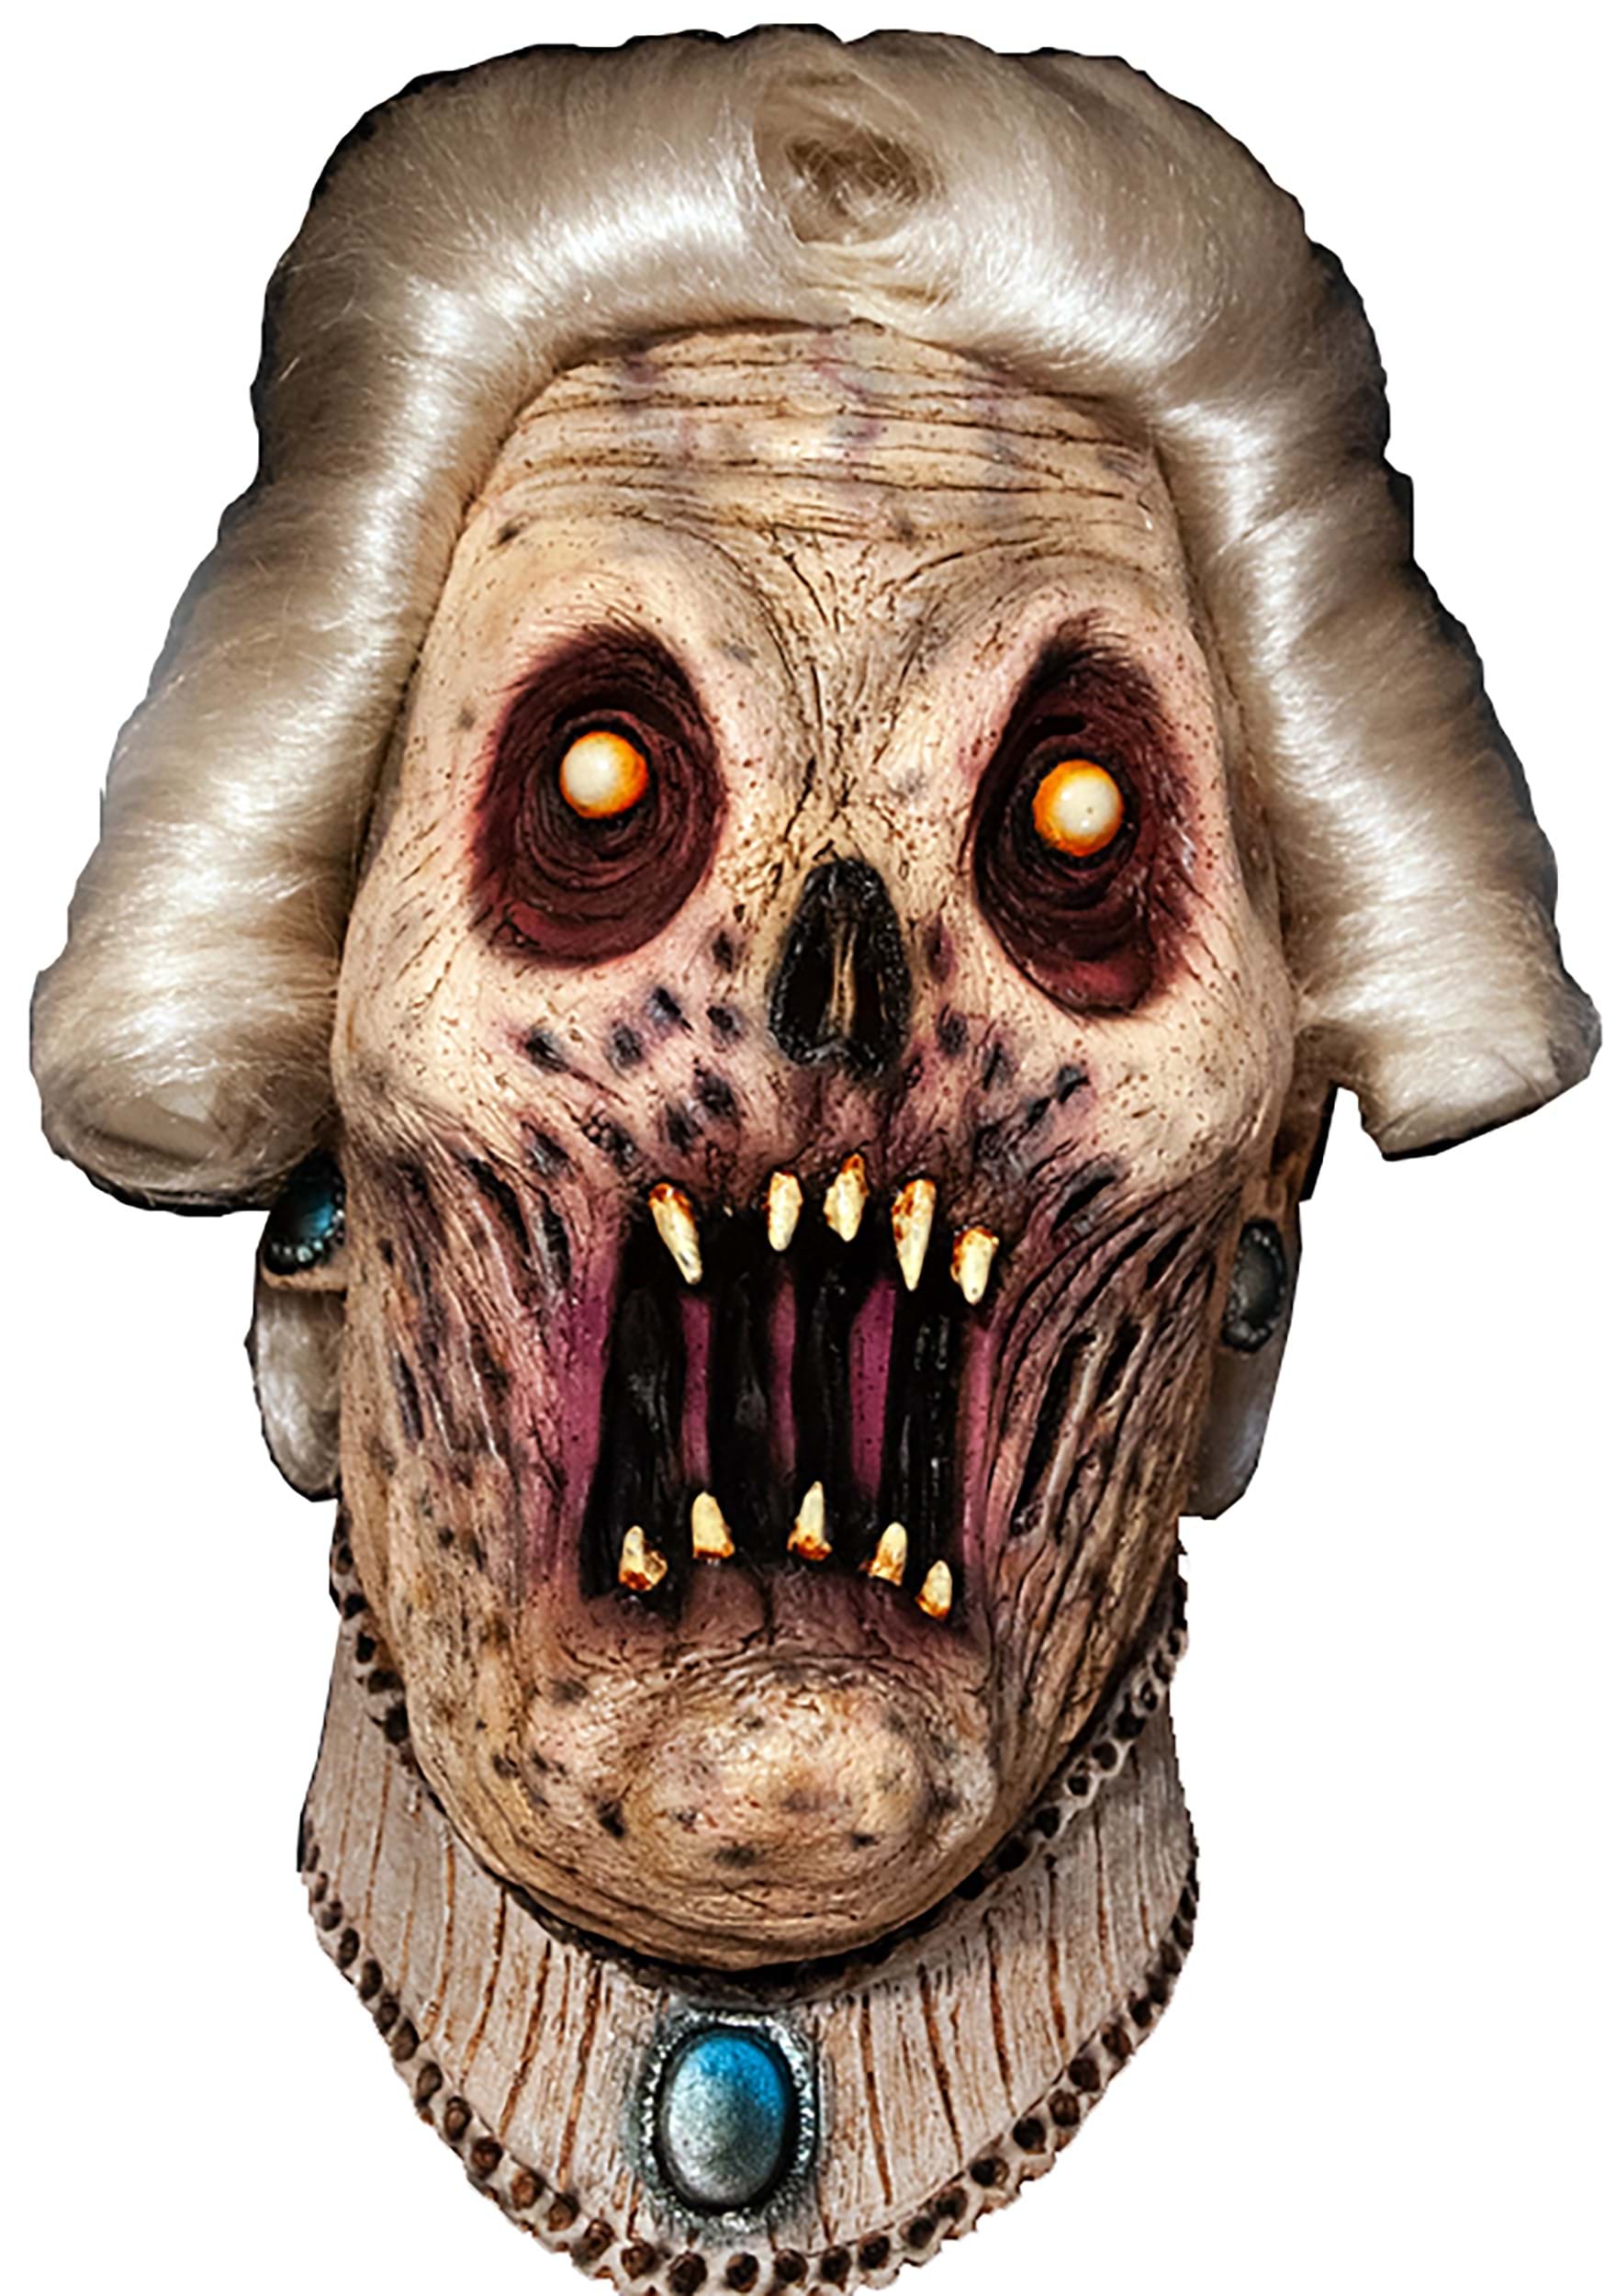 Image of The Duchess Zombie Mask ID LGLGM20212-ST